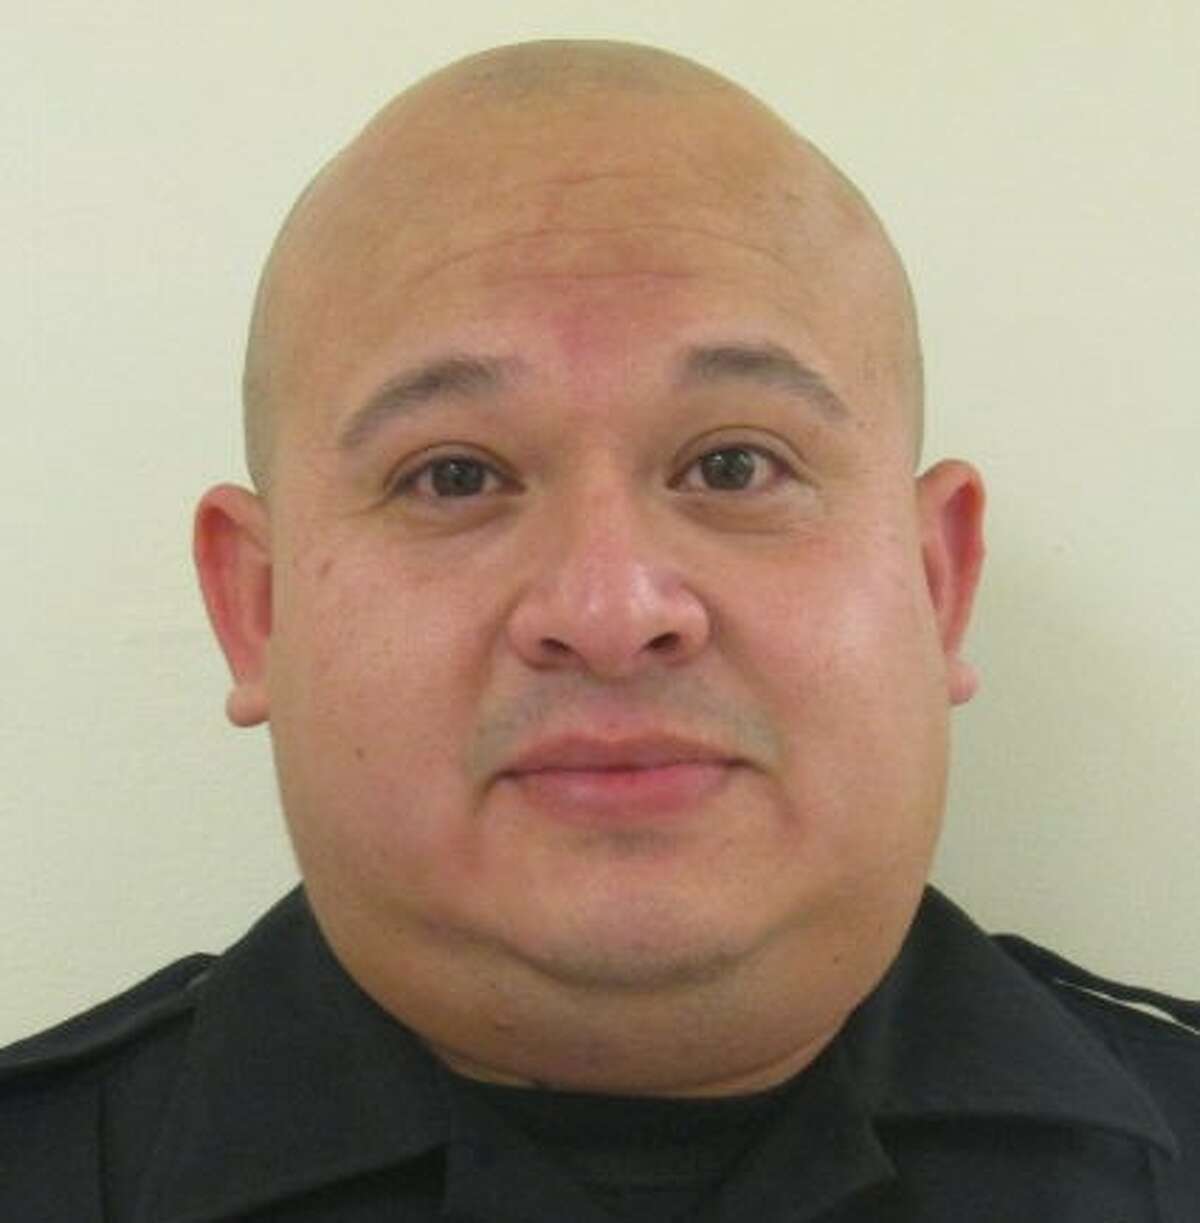 Twelve-year Bexar County Sheriff's Office veteran, Arnold Juarez Gomez, was arrested and later charged with DWI, according to the sheriff's office. The following gallery contains booking photos of area first responders arrested during the past three years.